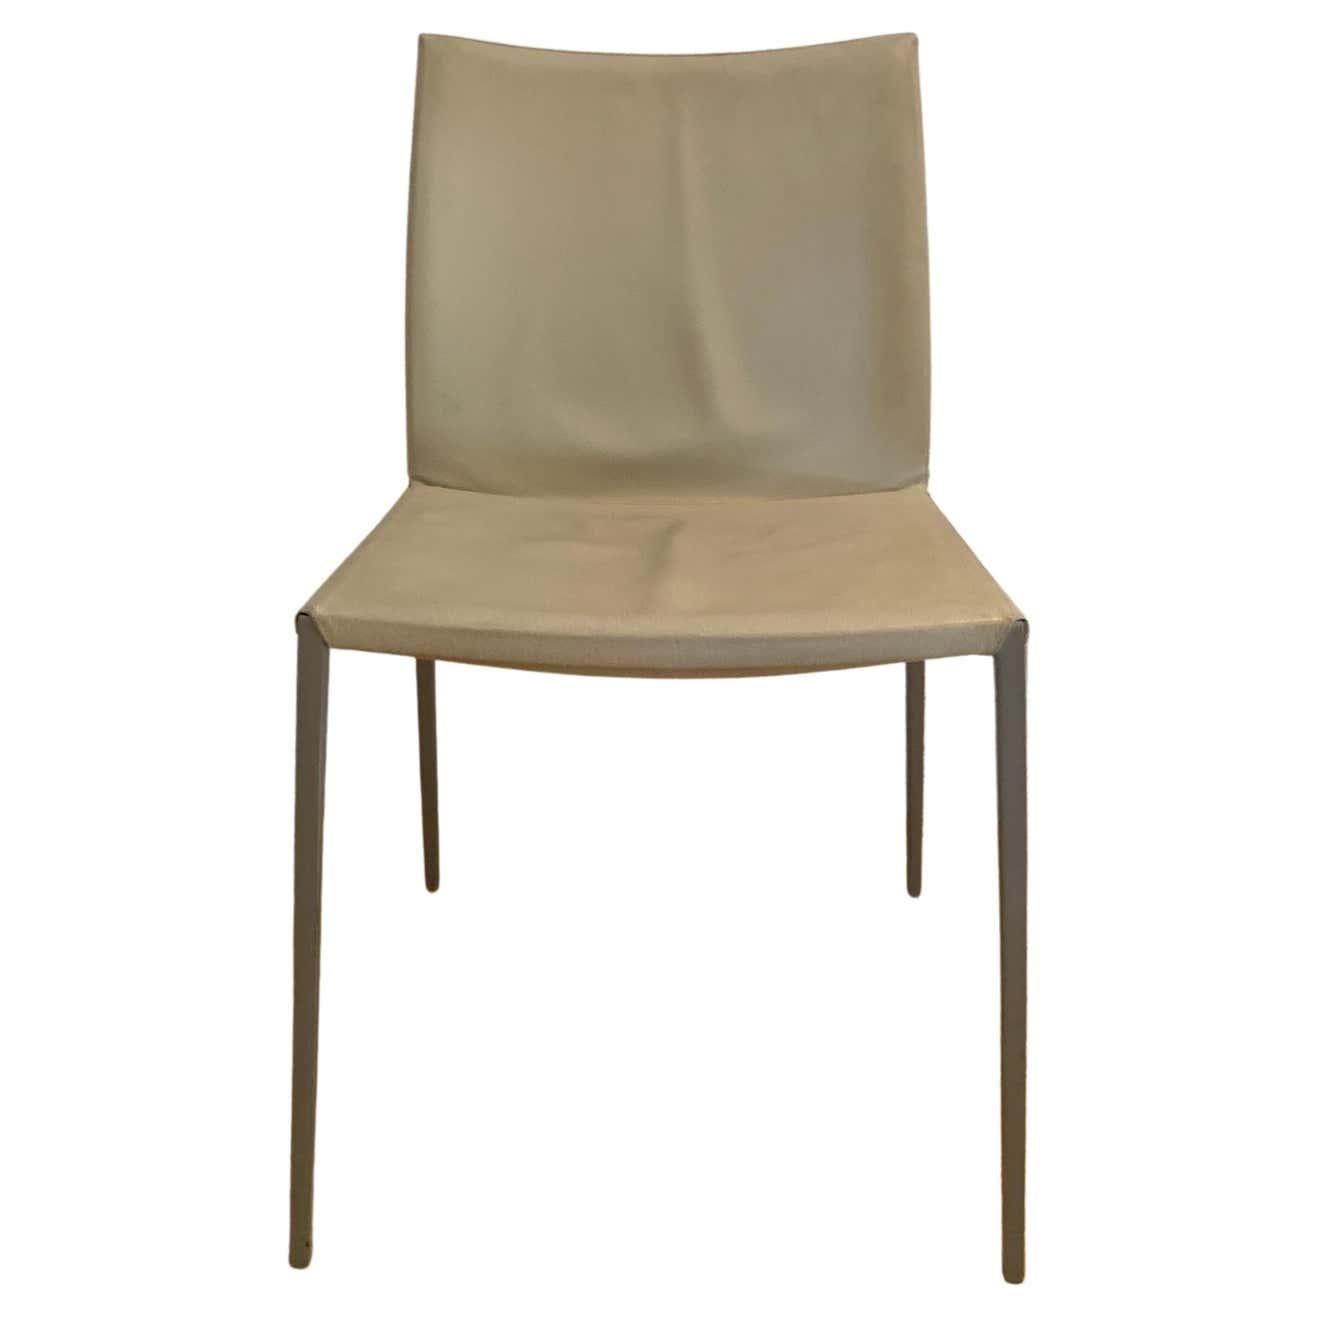 Lia leather dining chair by Roberto Barbieri for Zanotta
Made in Italy
In stock in Los Angeles

Condition: Fair (please refer to the product images to view the condition of the chairs).